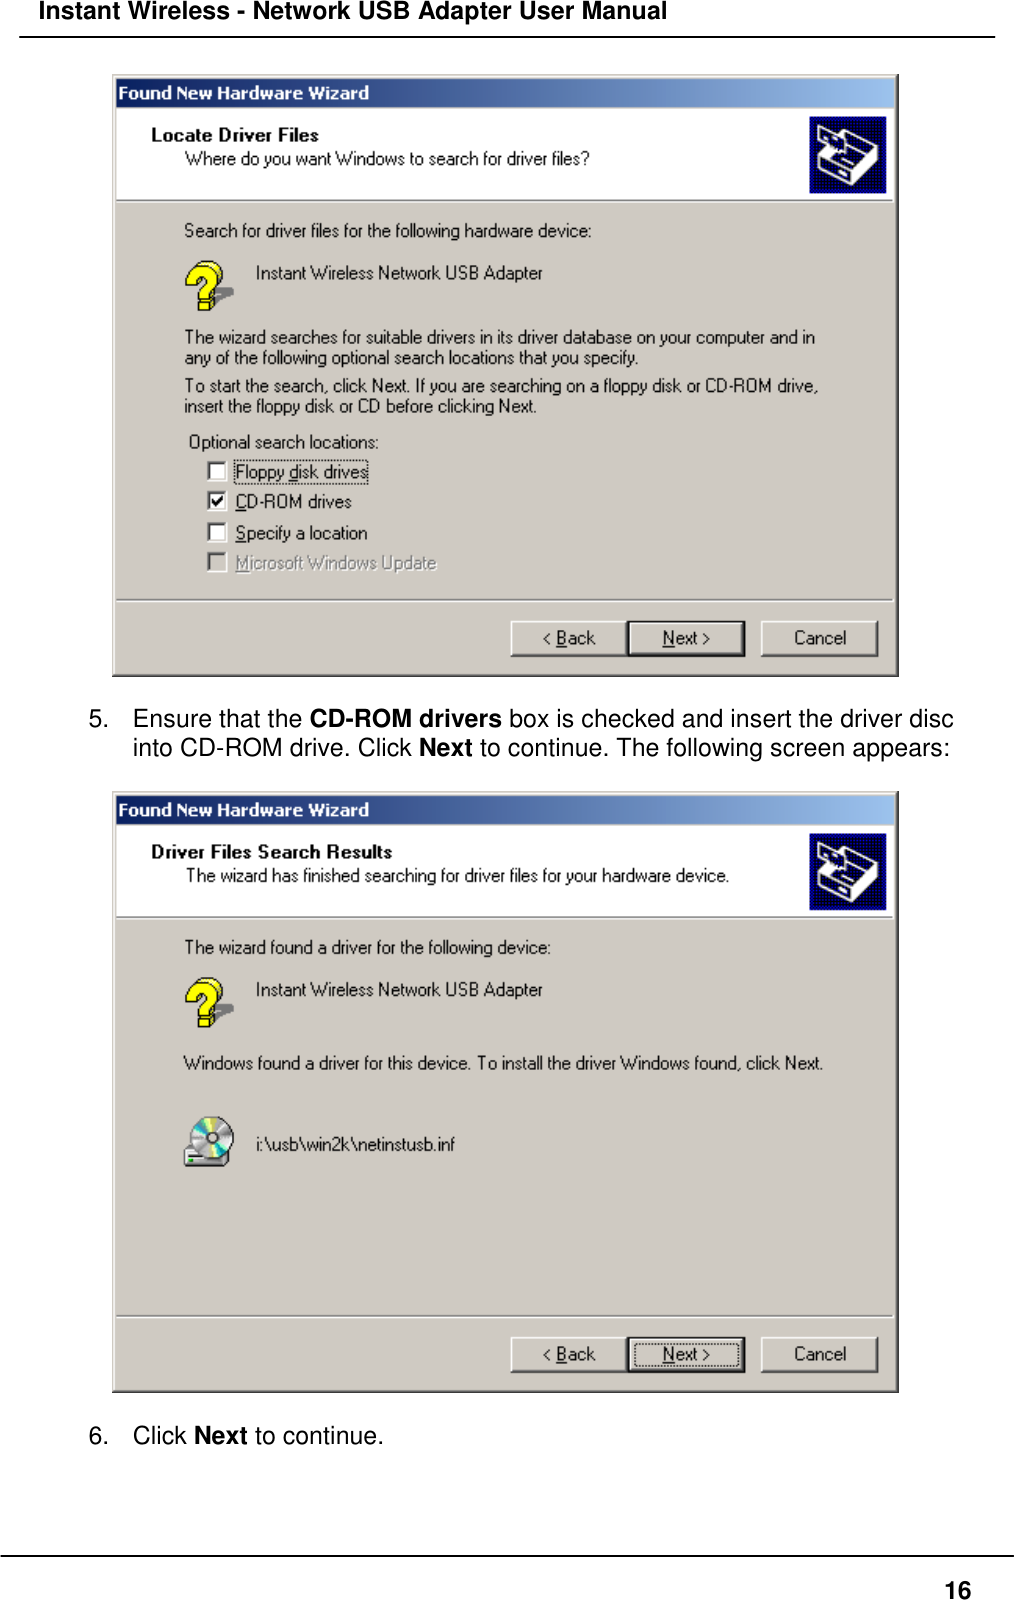 Instant Wireless - Network USB Adapter User Manual165. Ensure that the CD-ROM drivers box is checked and insert the driver discinto CD-ROM drive. Click Next to continue. The following screen appears:6. Click Next to continue.